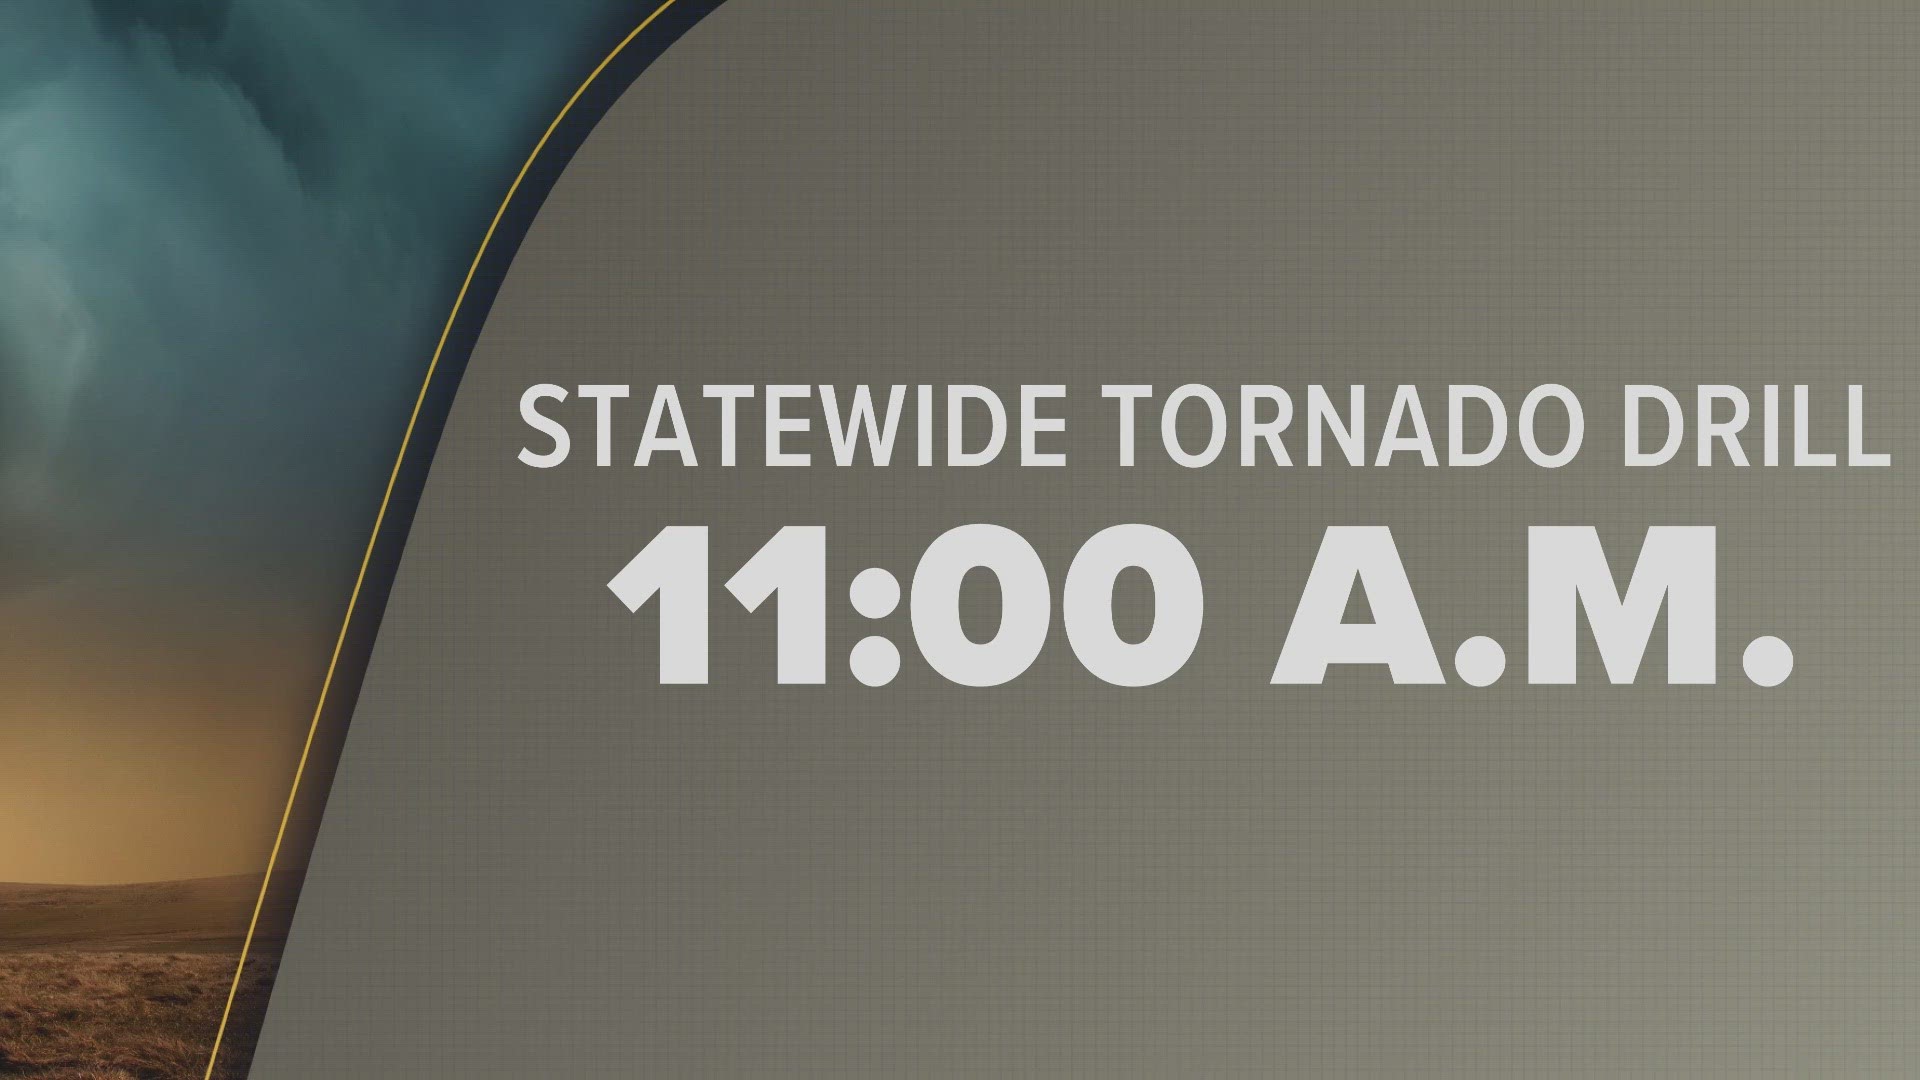 Sirens will blare throughout Missouri Wednesday morning but not because severe weather is expected. It's part of Missouri's annual Statewide Tornado Drill.